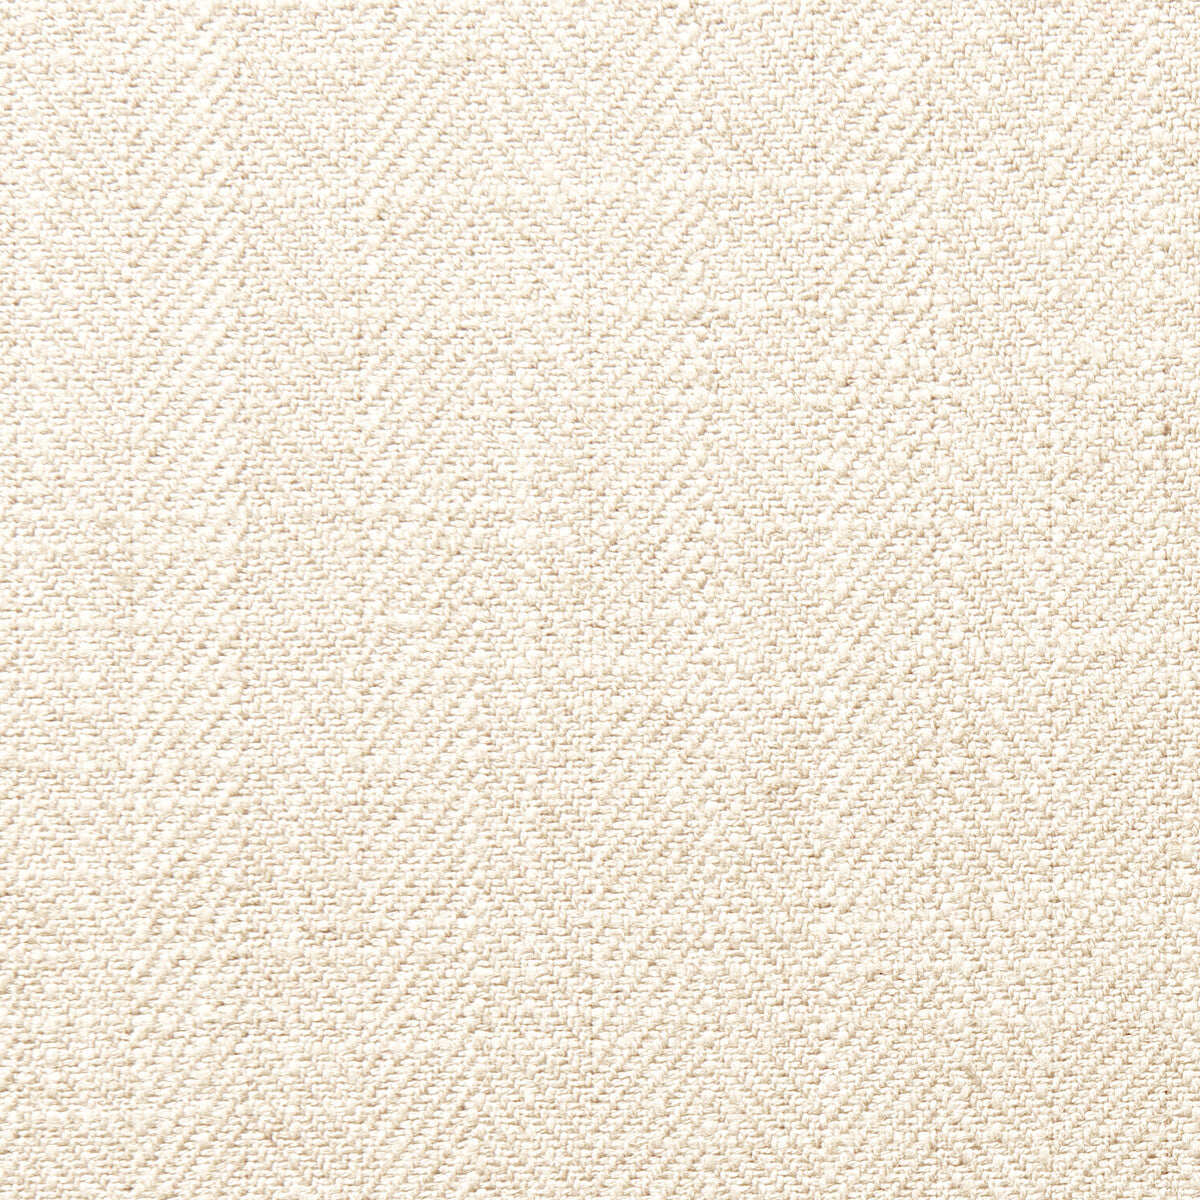 Henley fabric in ivory color - pattern F0648/18.CAC.0 - by Clarke And Clarke in the Clarke &amp; Clarke Henley collection